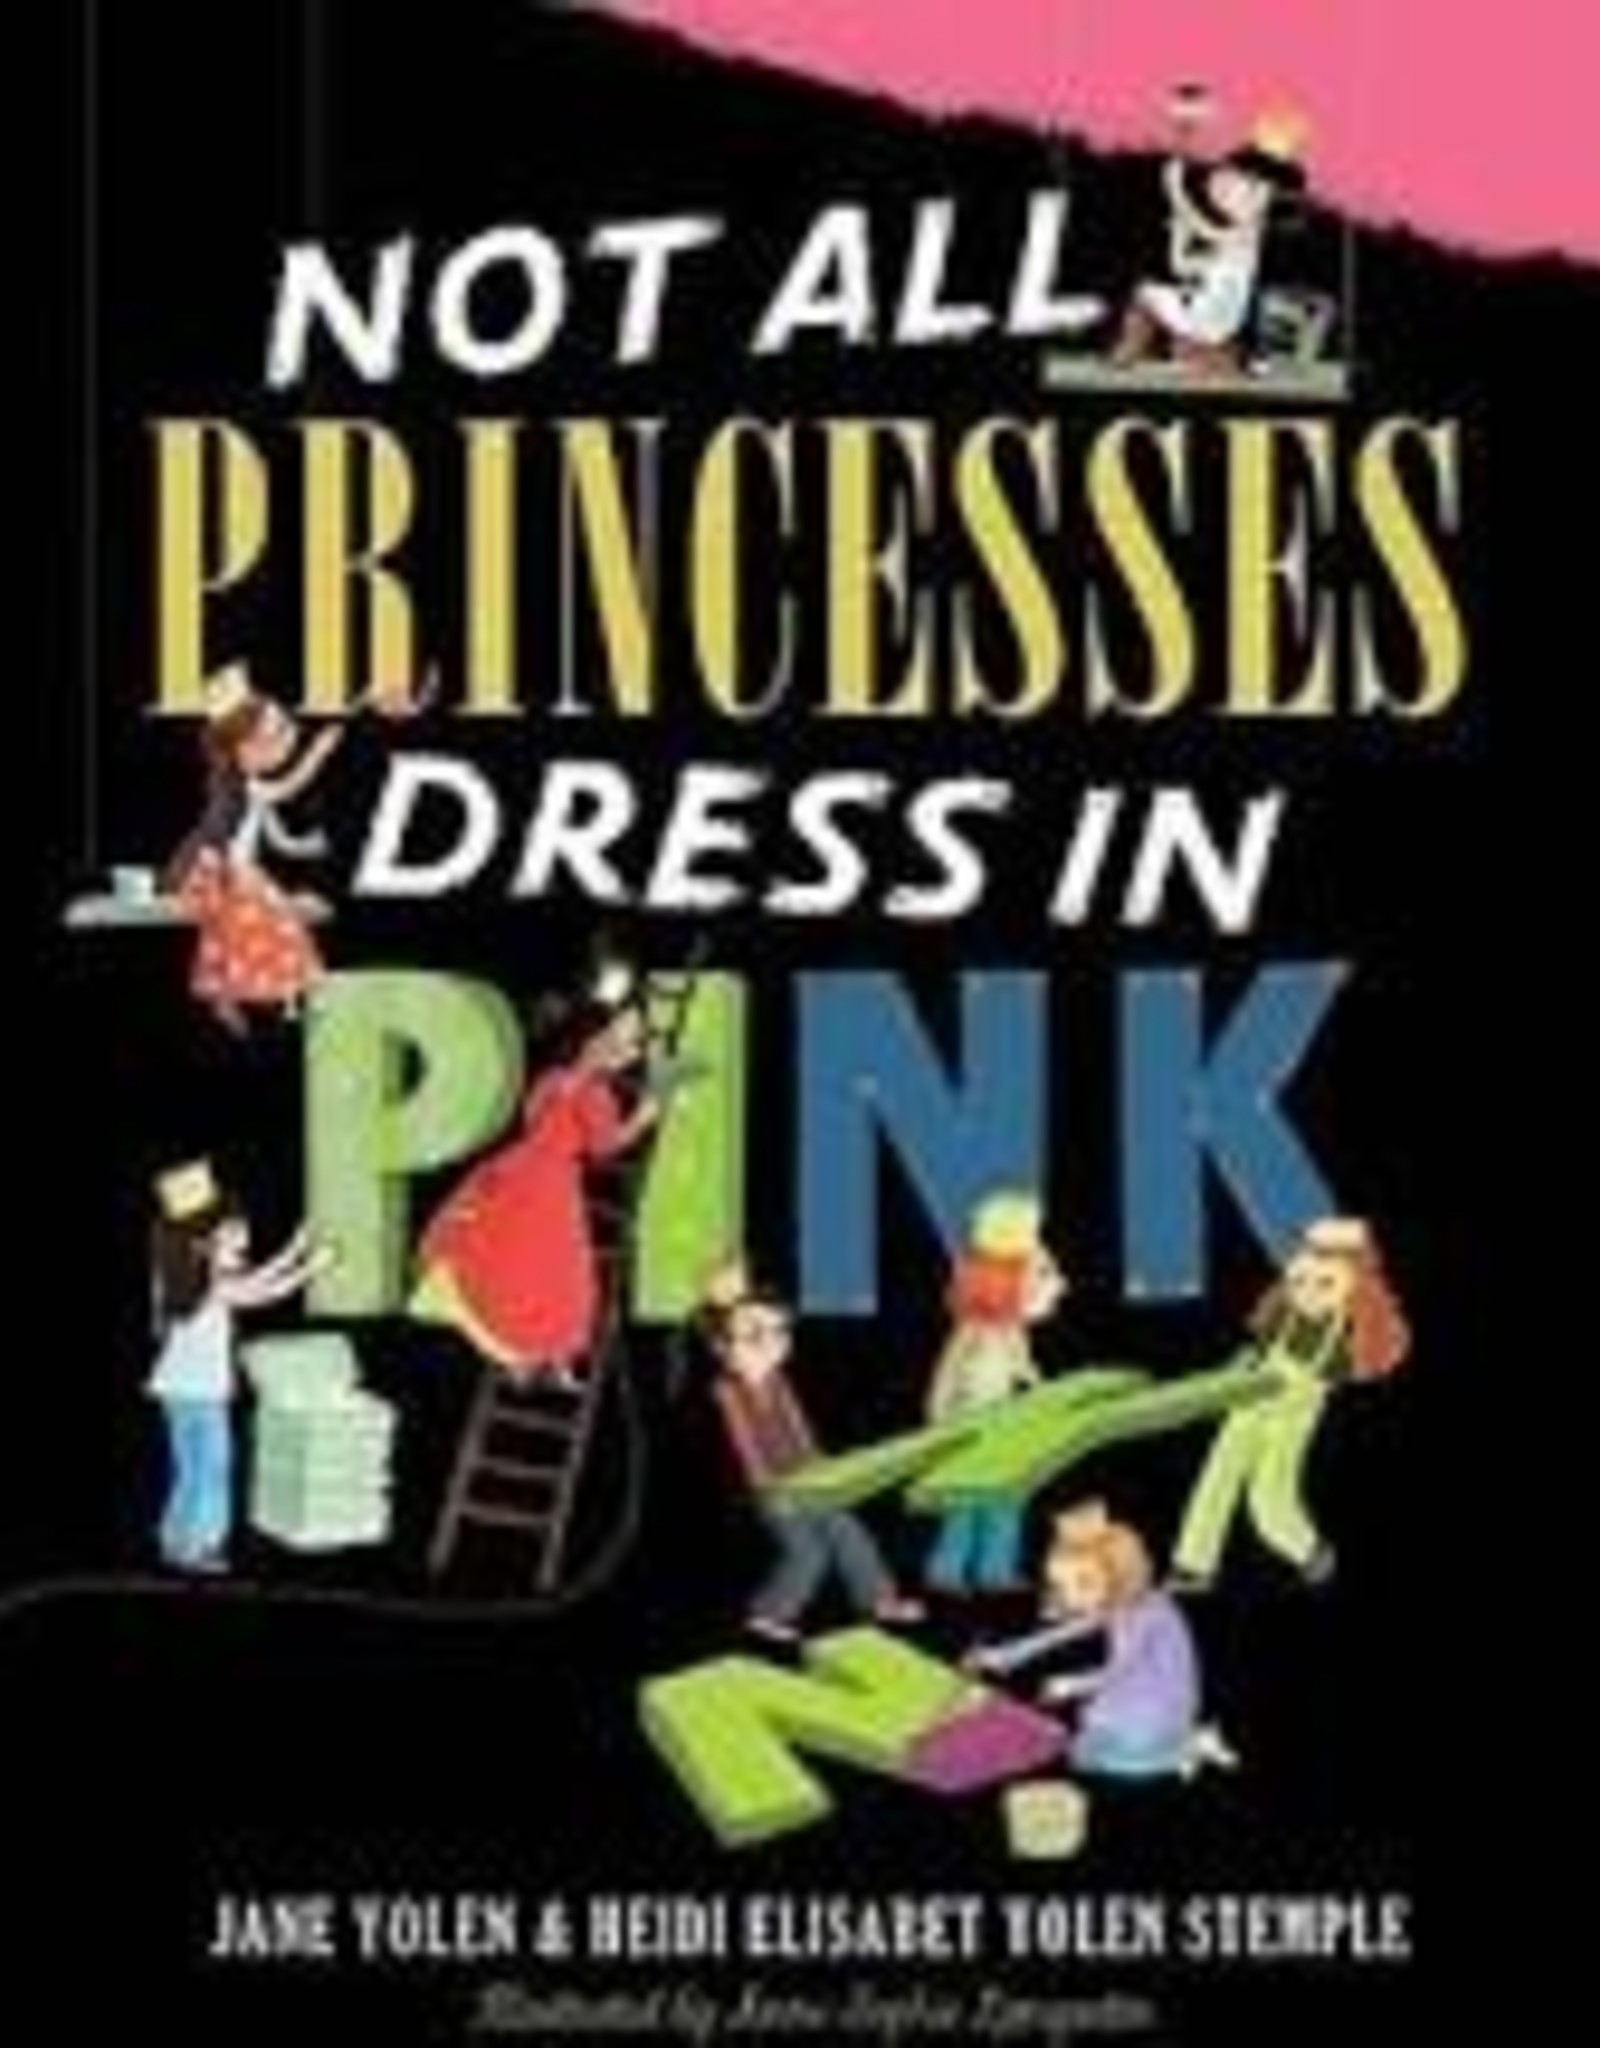 Simon & Schuster Not All Princesses Dress in Pink